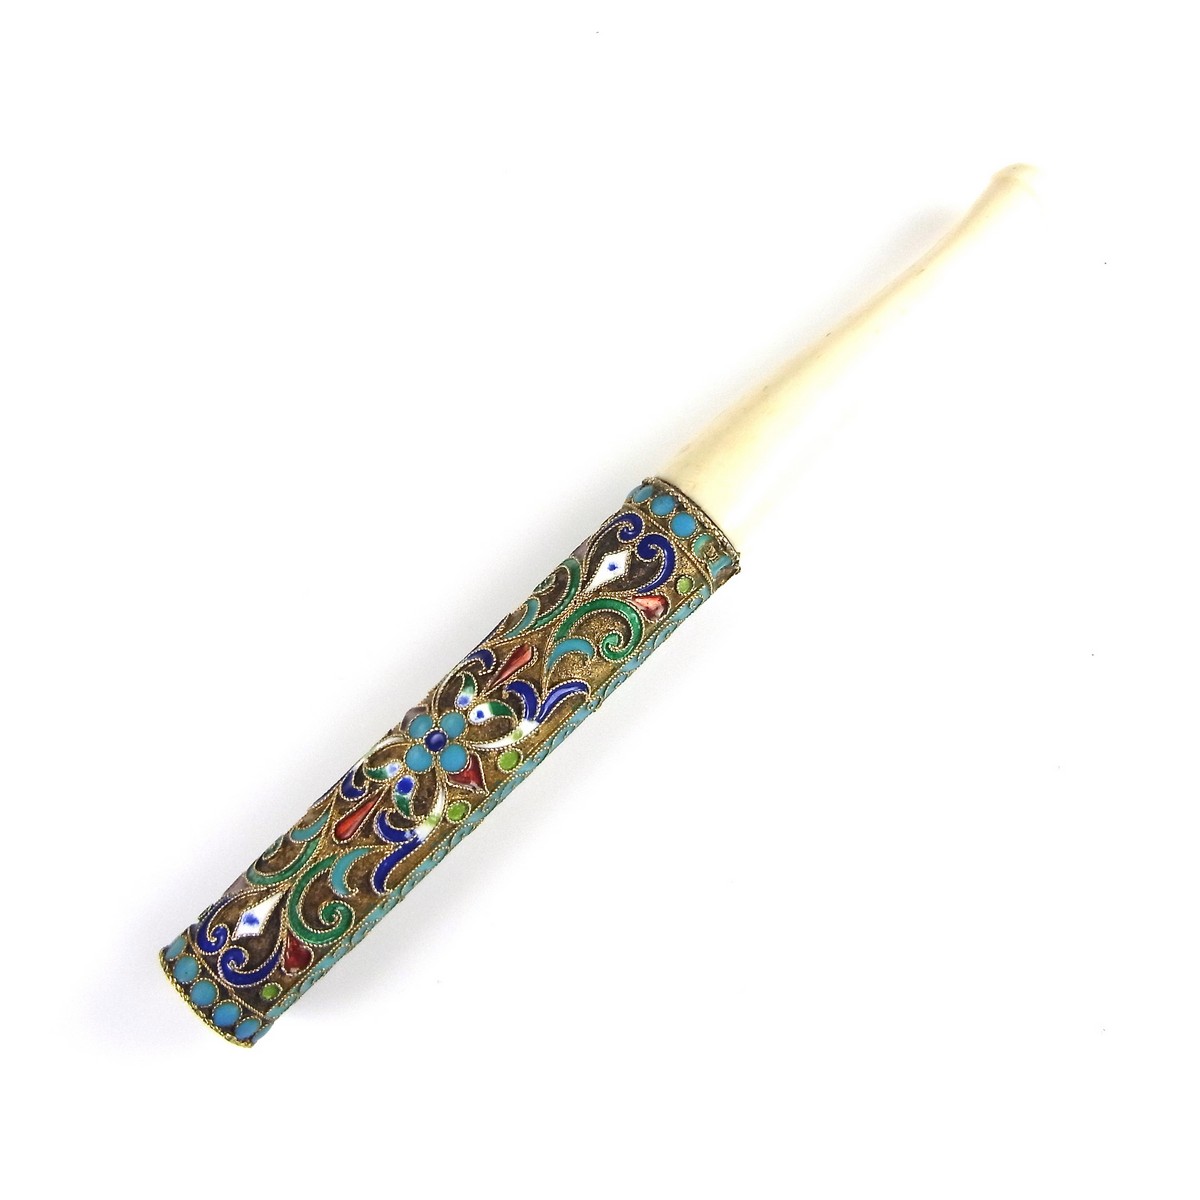 A Russian gilt silver and cloisonne enamelled cigar holder, late 19th/early 20th century.